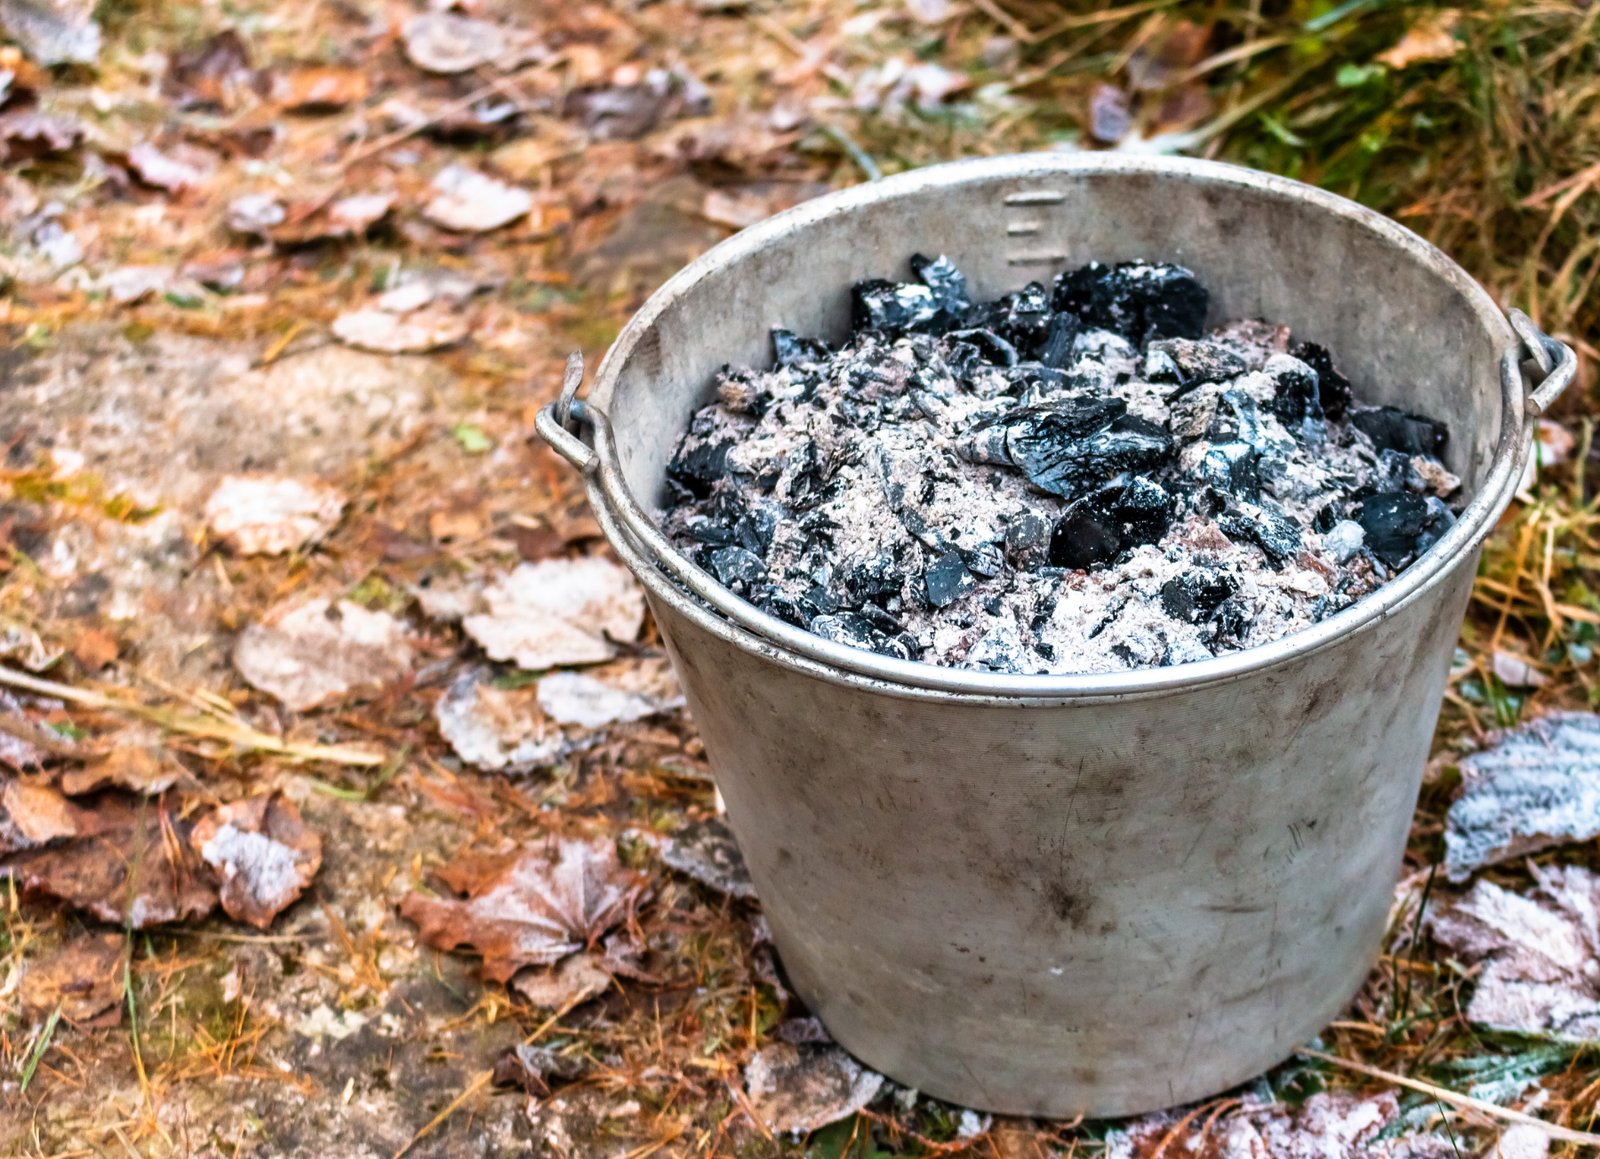 Is Wood Ash Good for Plants?